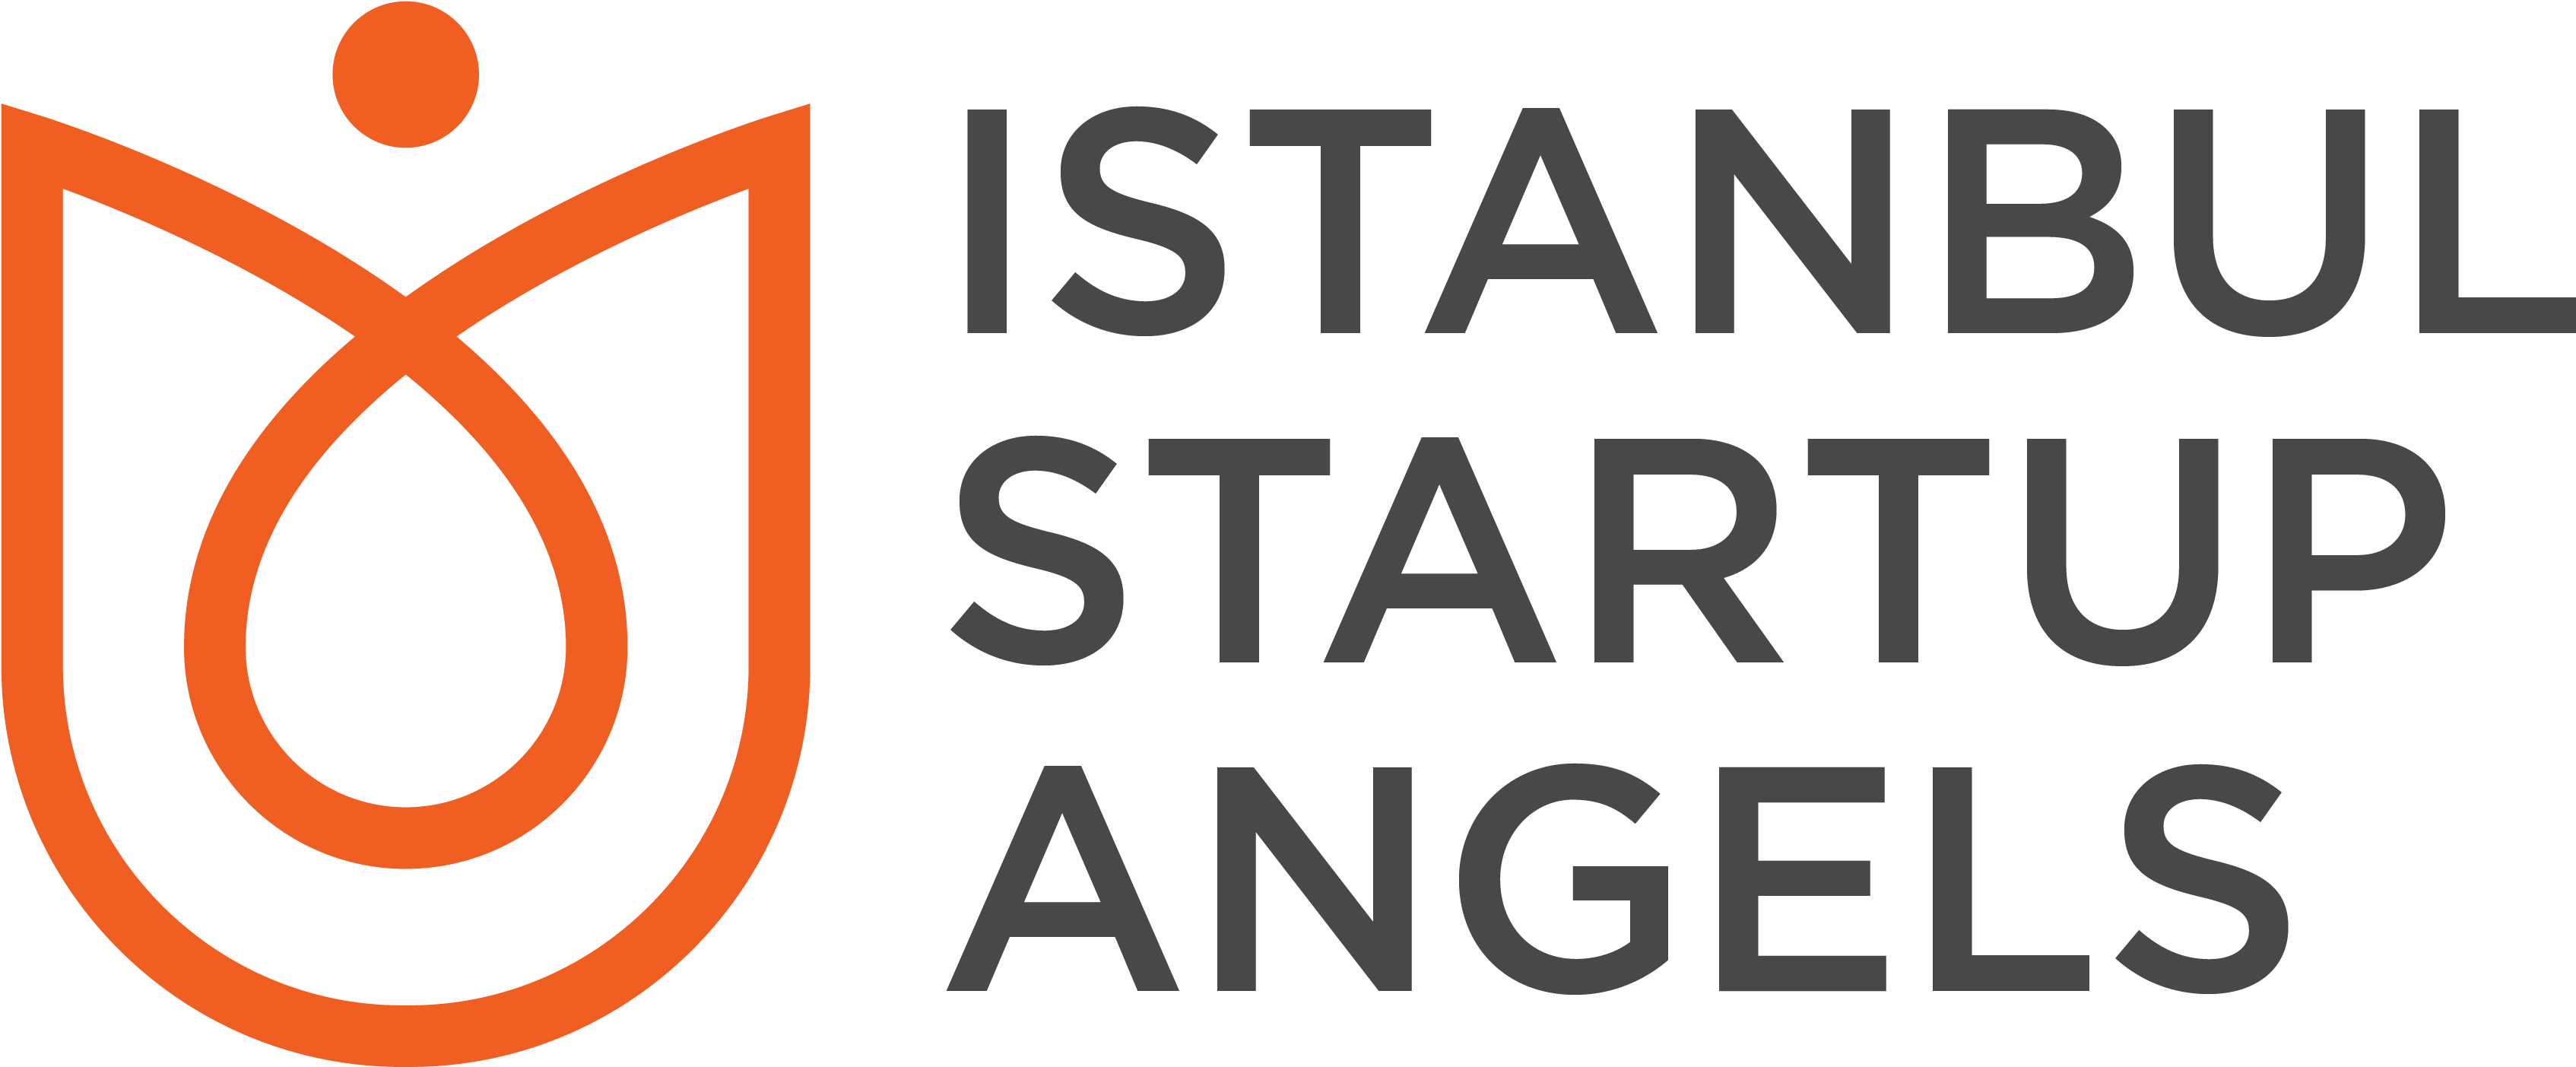 Istanbul Startup Angels Ban - Ending Clergy Abuse (3403x1418), Png Download